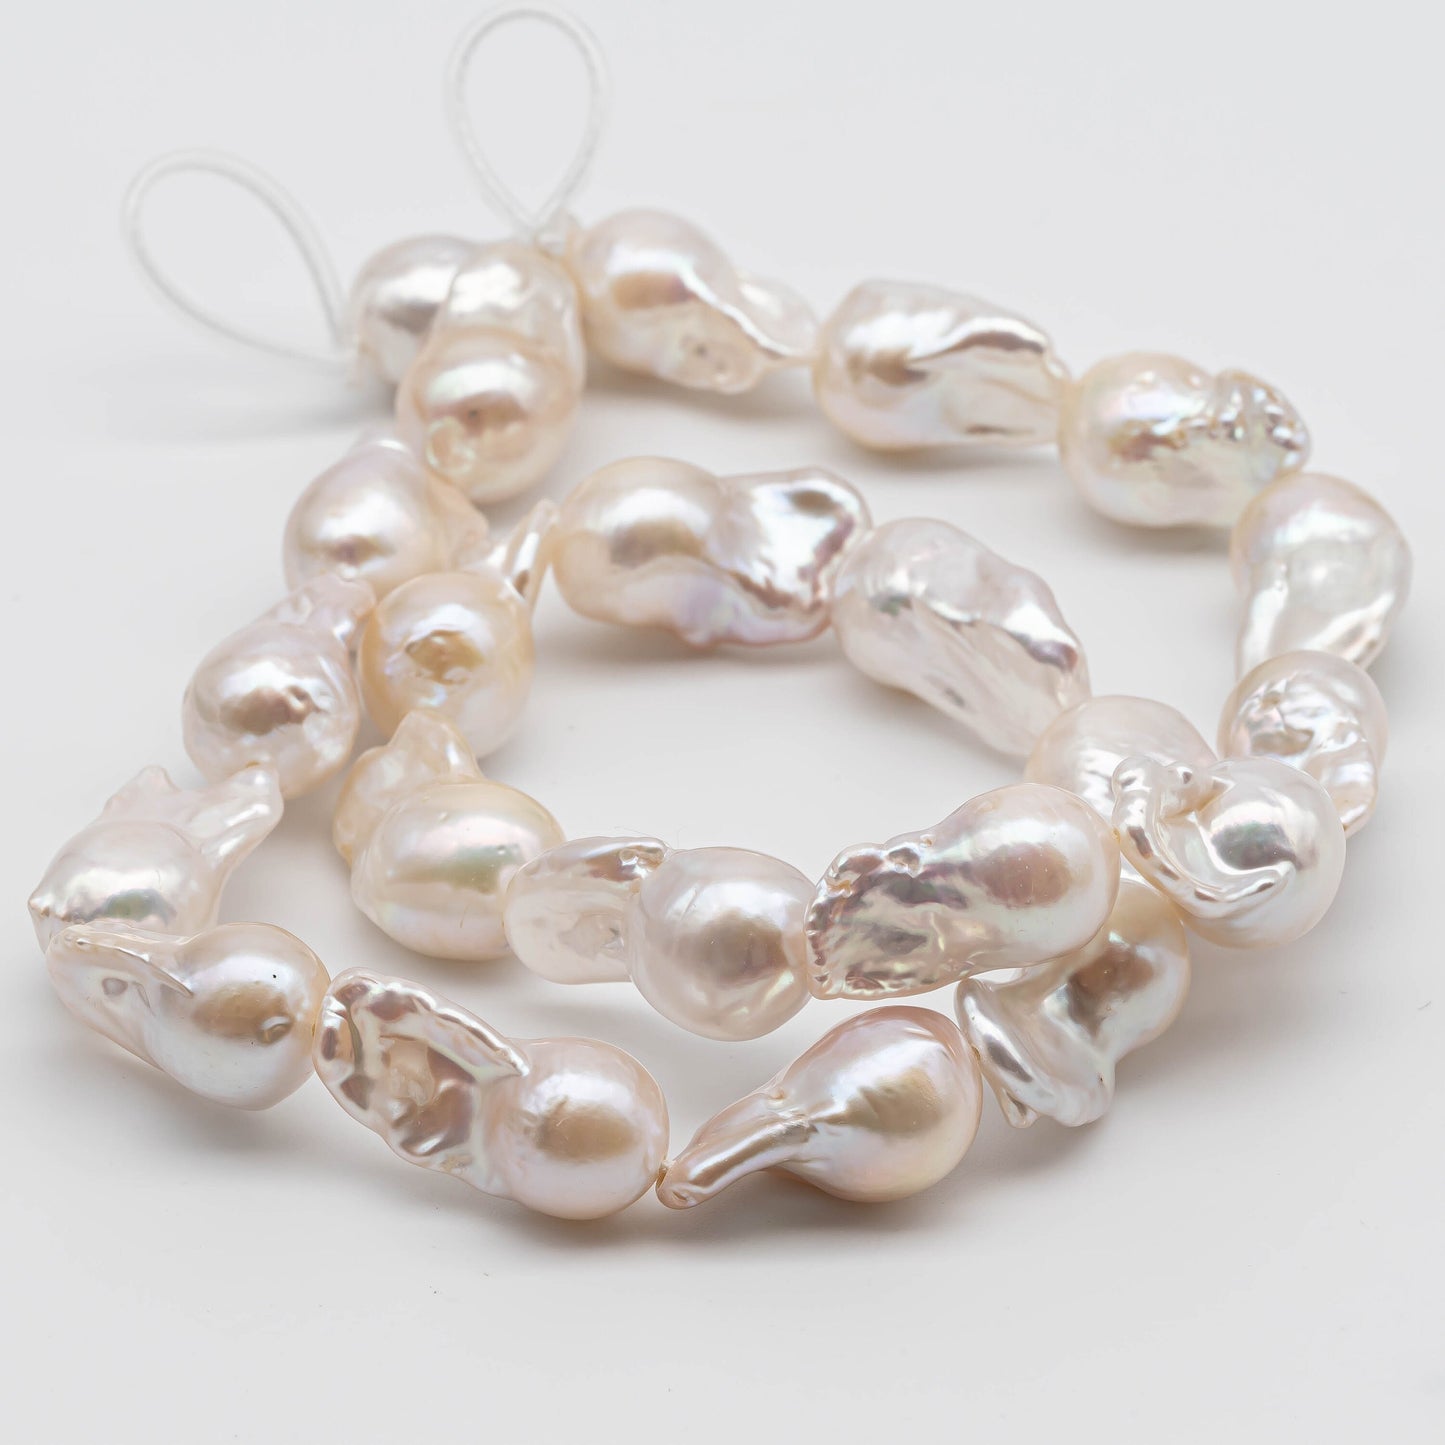 Small Baroque Pearl Beads in White Freshwater Pearls with High Luster and Genuine Pearl, Rare Finding in 10-12mm in Full Strand, SKU# 1113BA